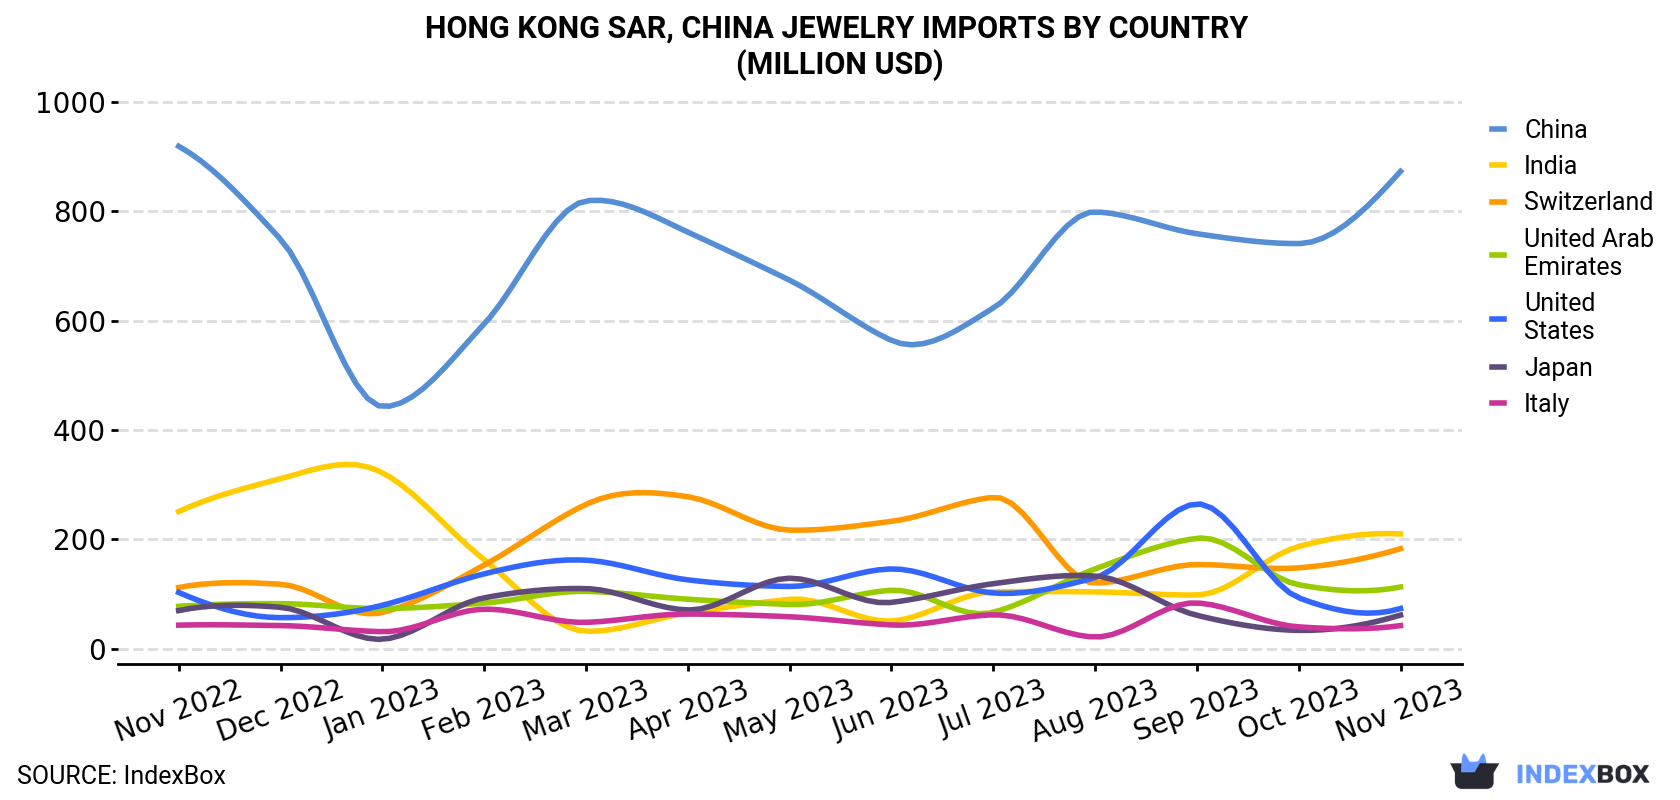 Hong Kong Jewelry Imports By Country (Million USD)